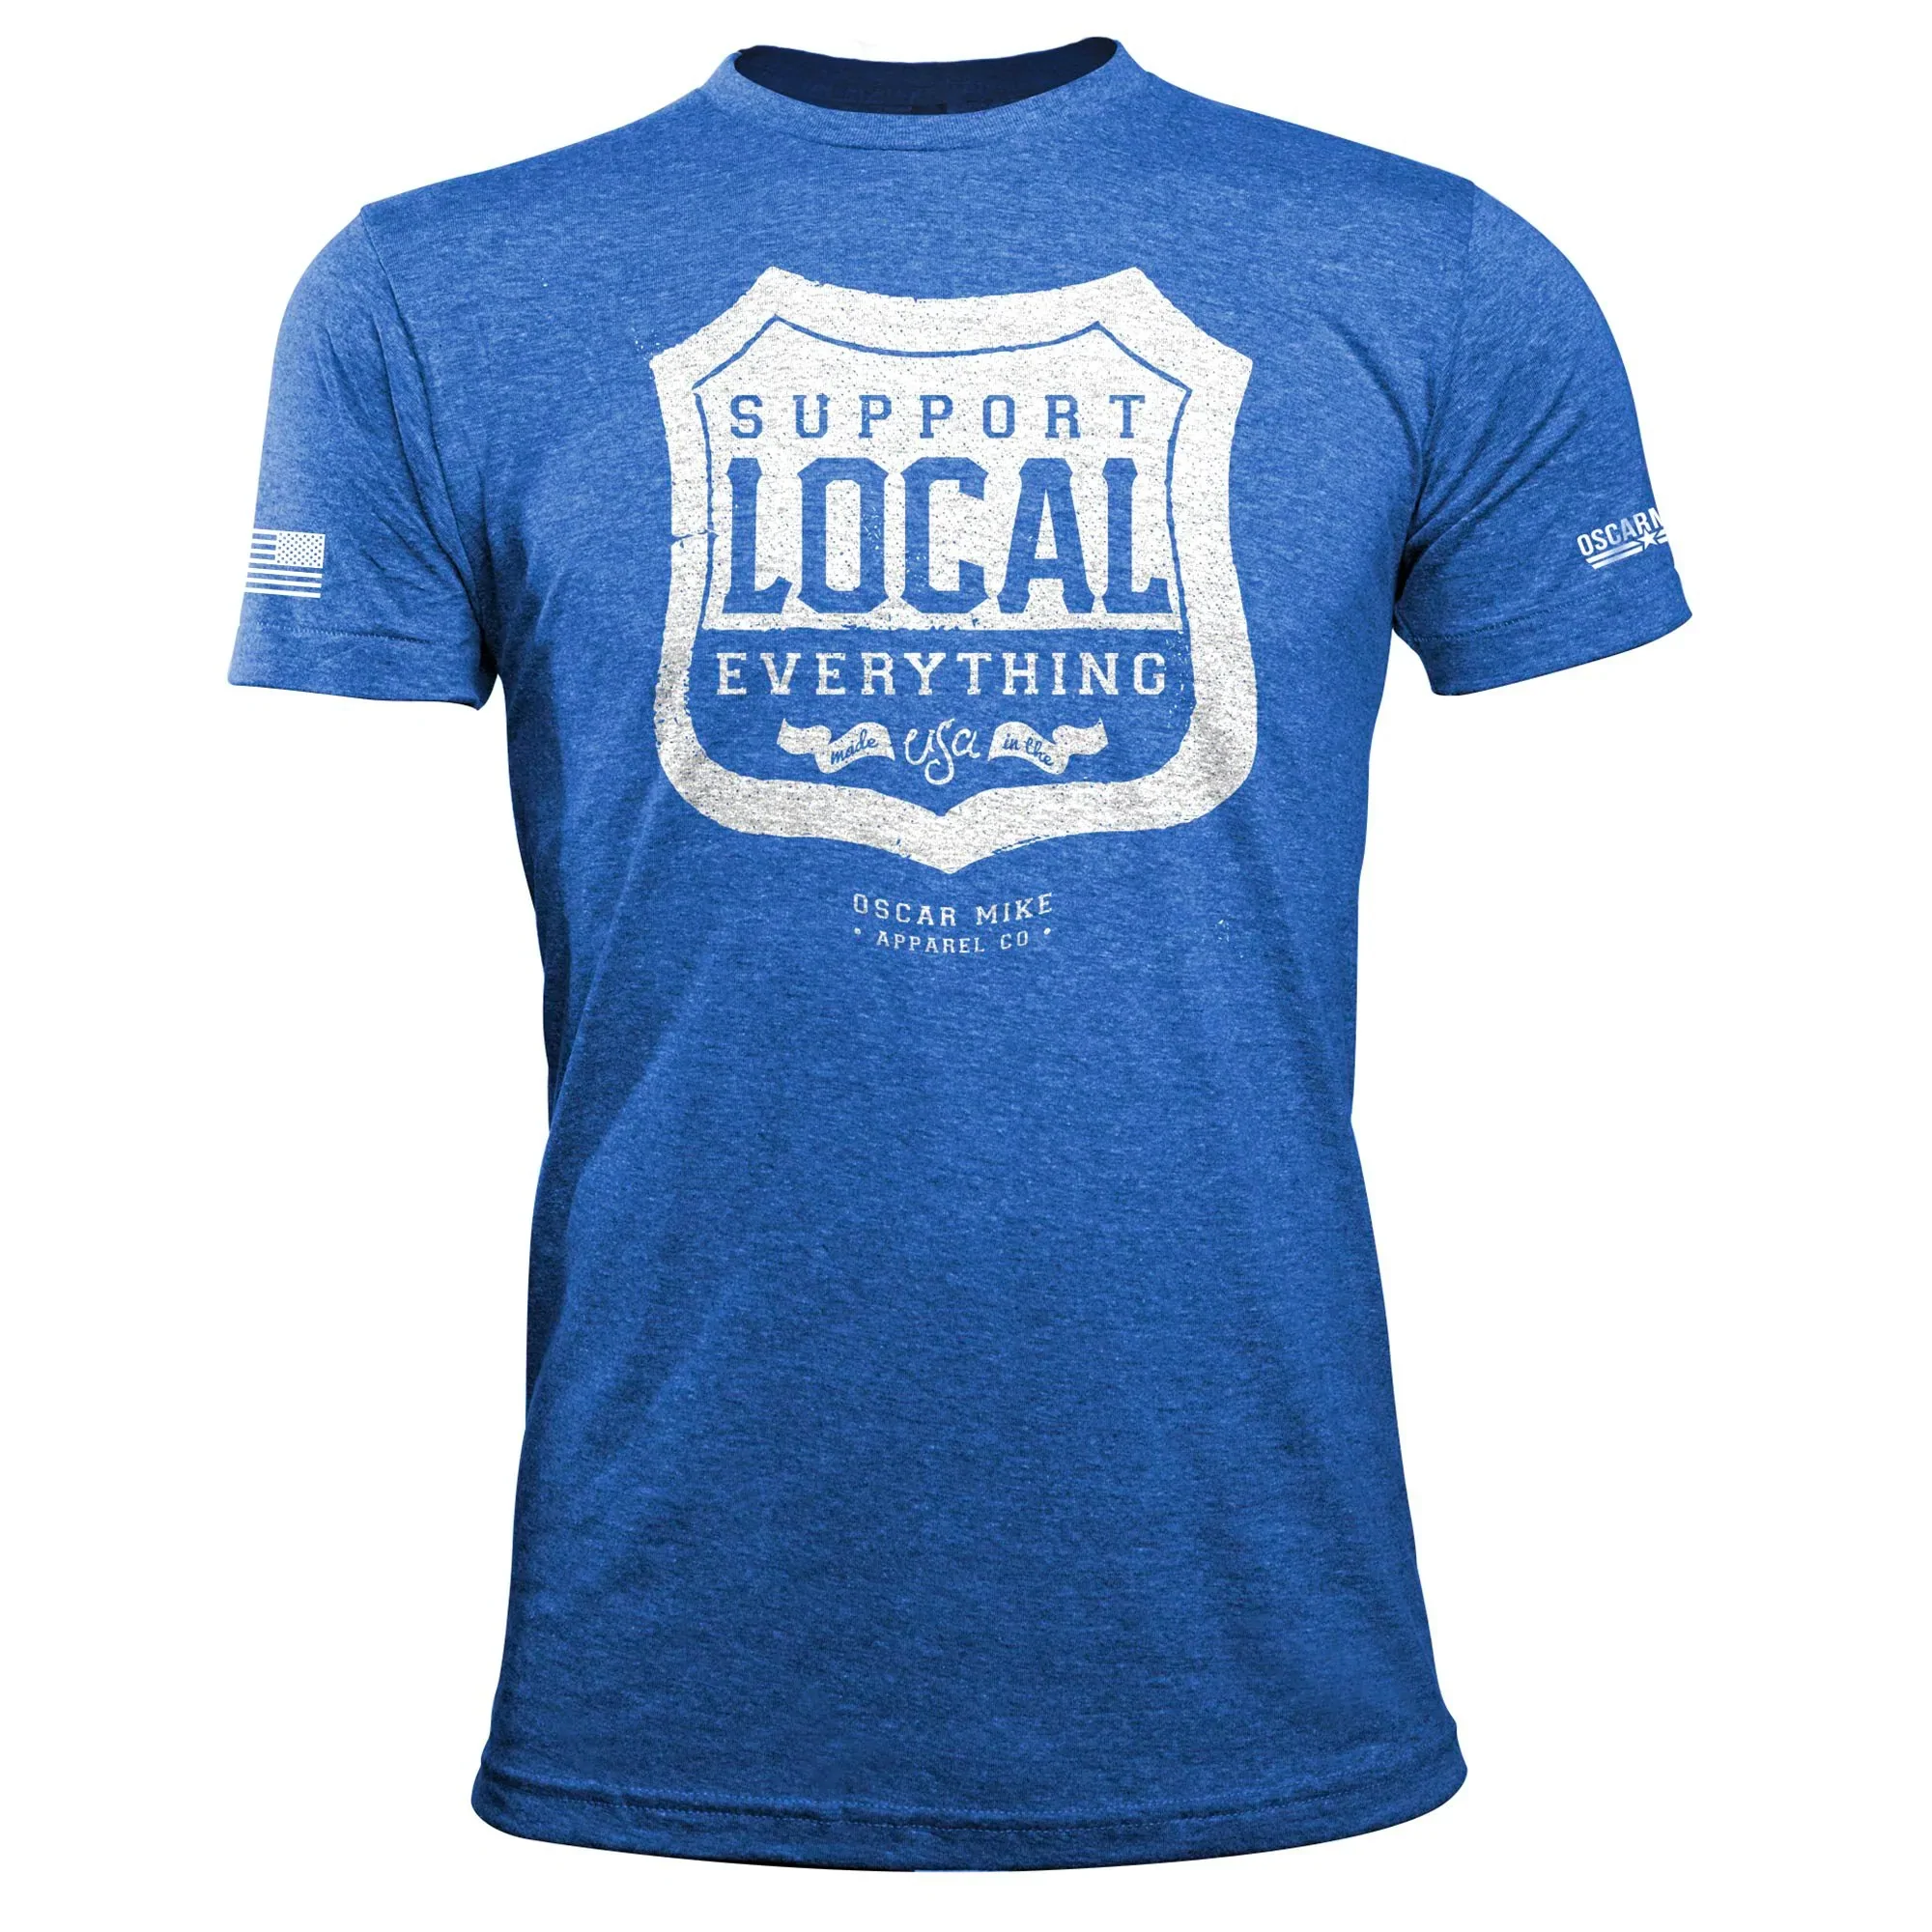 Oscar Mike Men's Support Local Everything Tee